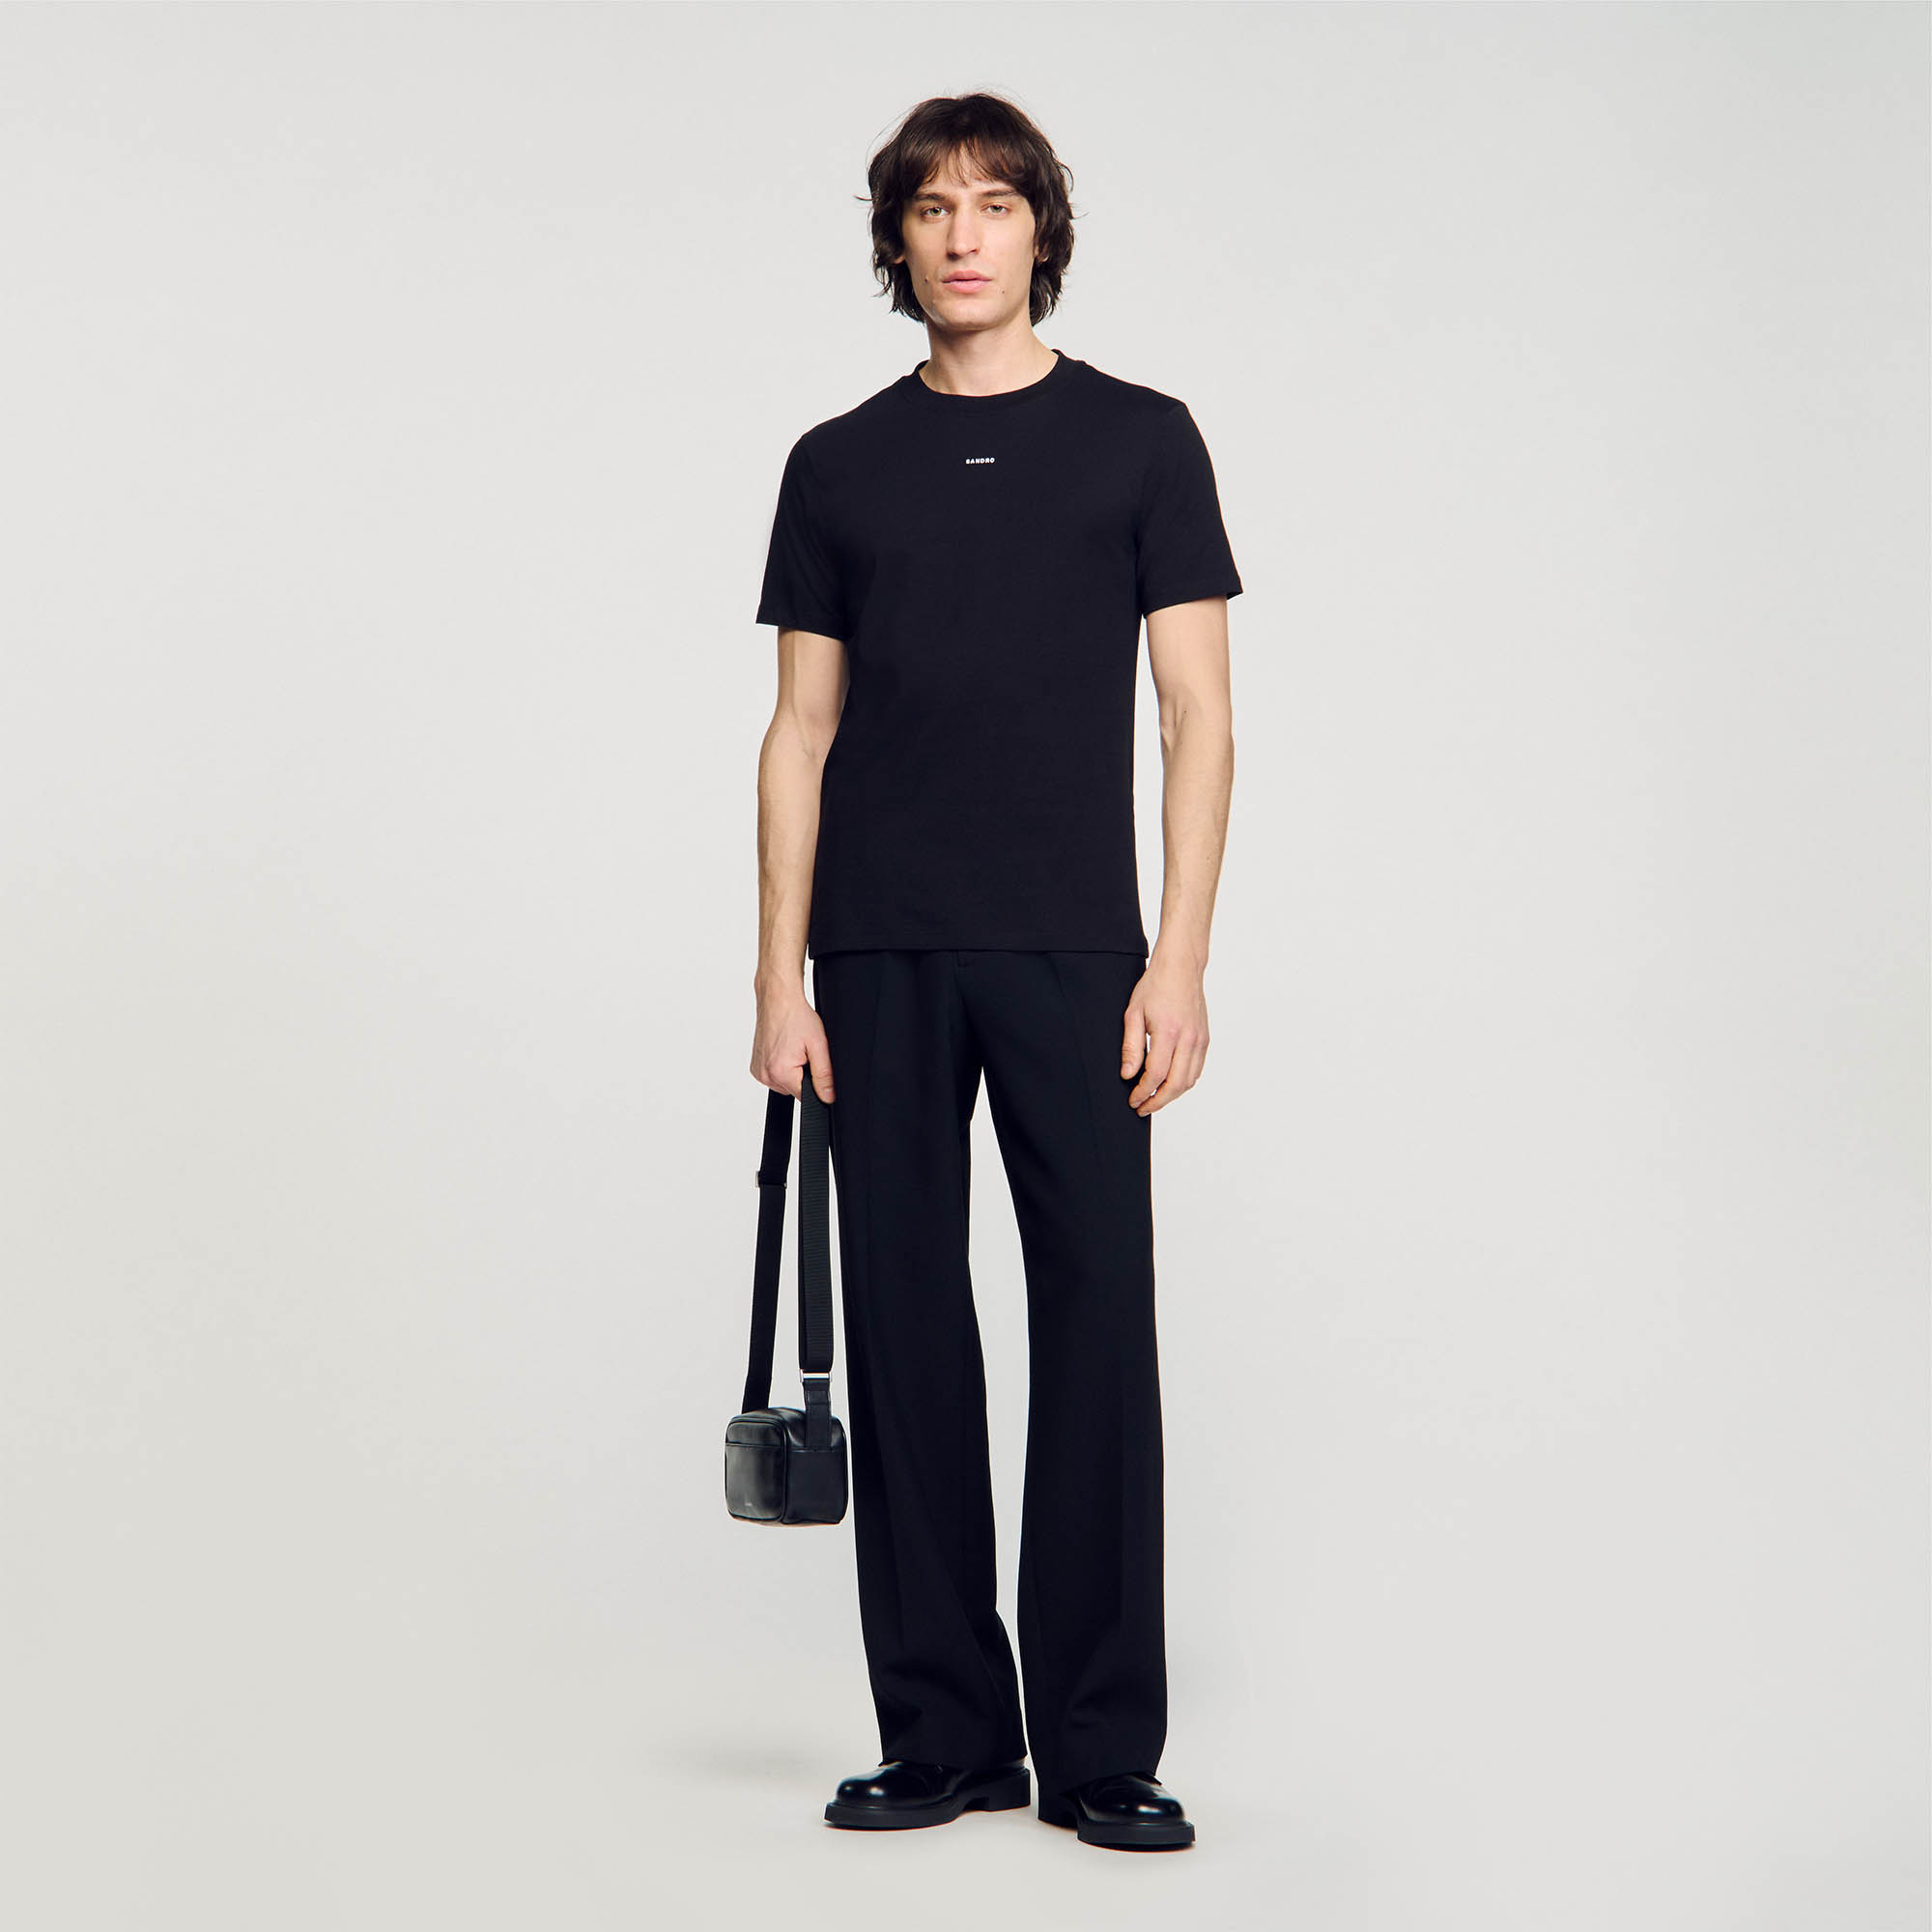 Sandro cotton Rib: T-shirt with a round neck and short sleeves decorated with Sandro embroidery